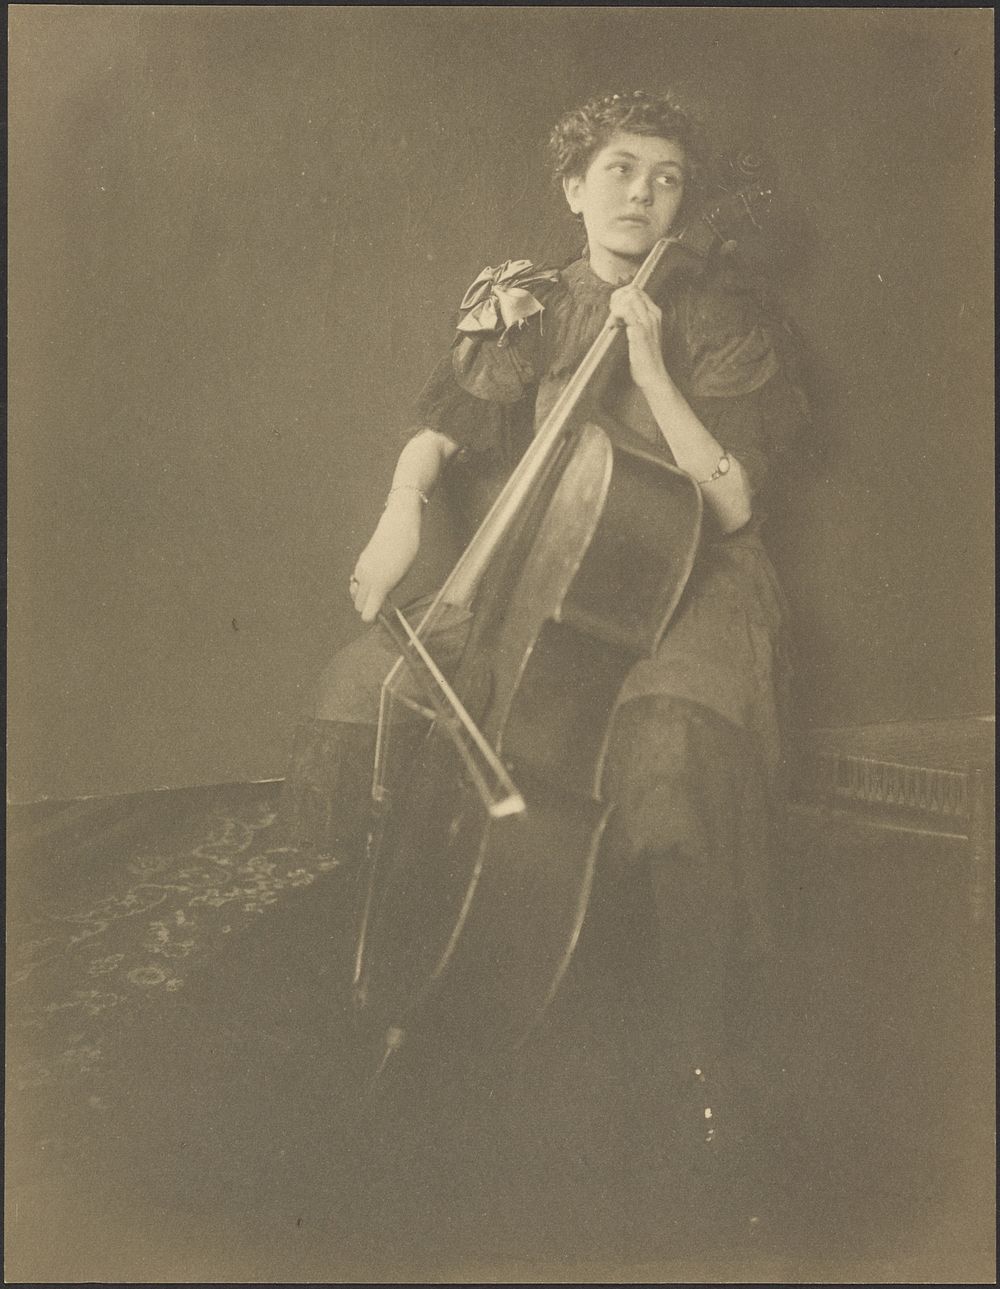 Portrait of a Woman Playing the Cello by Louis Fleckenstein